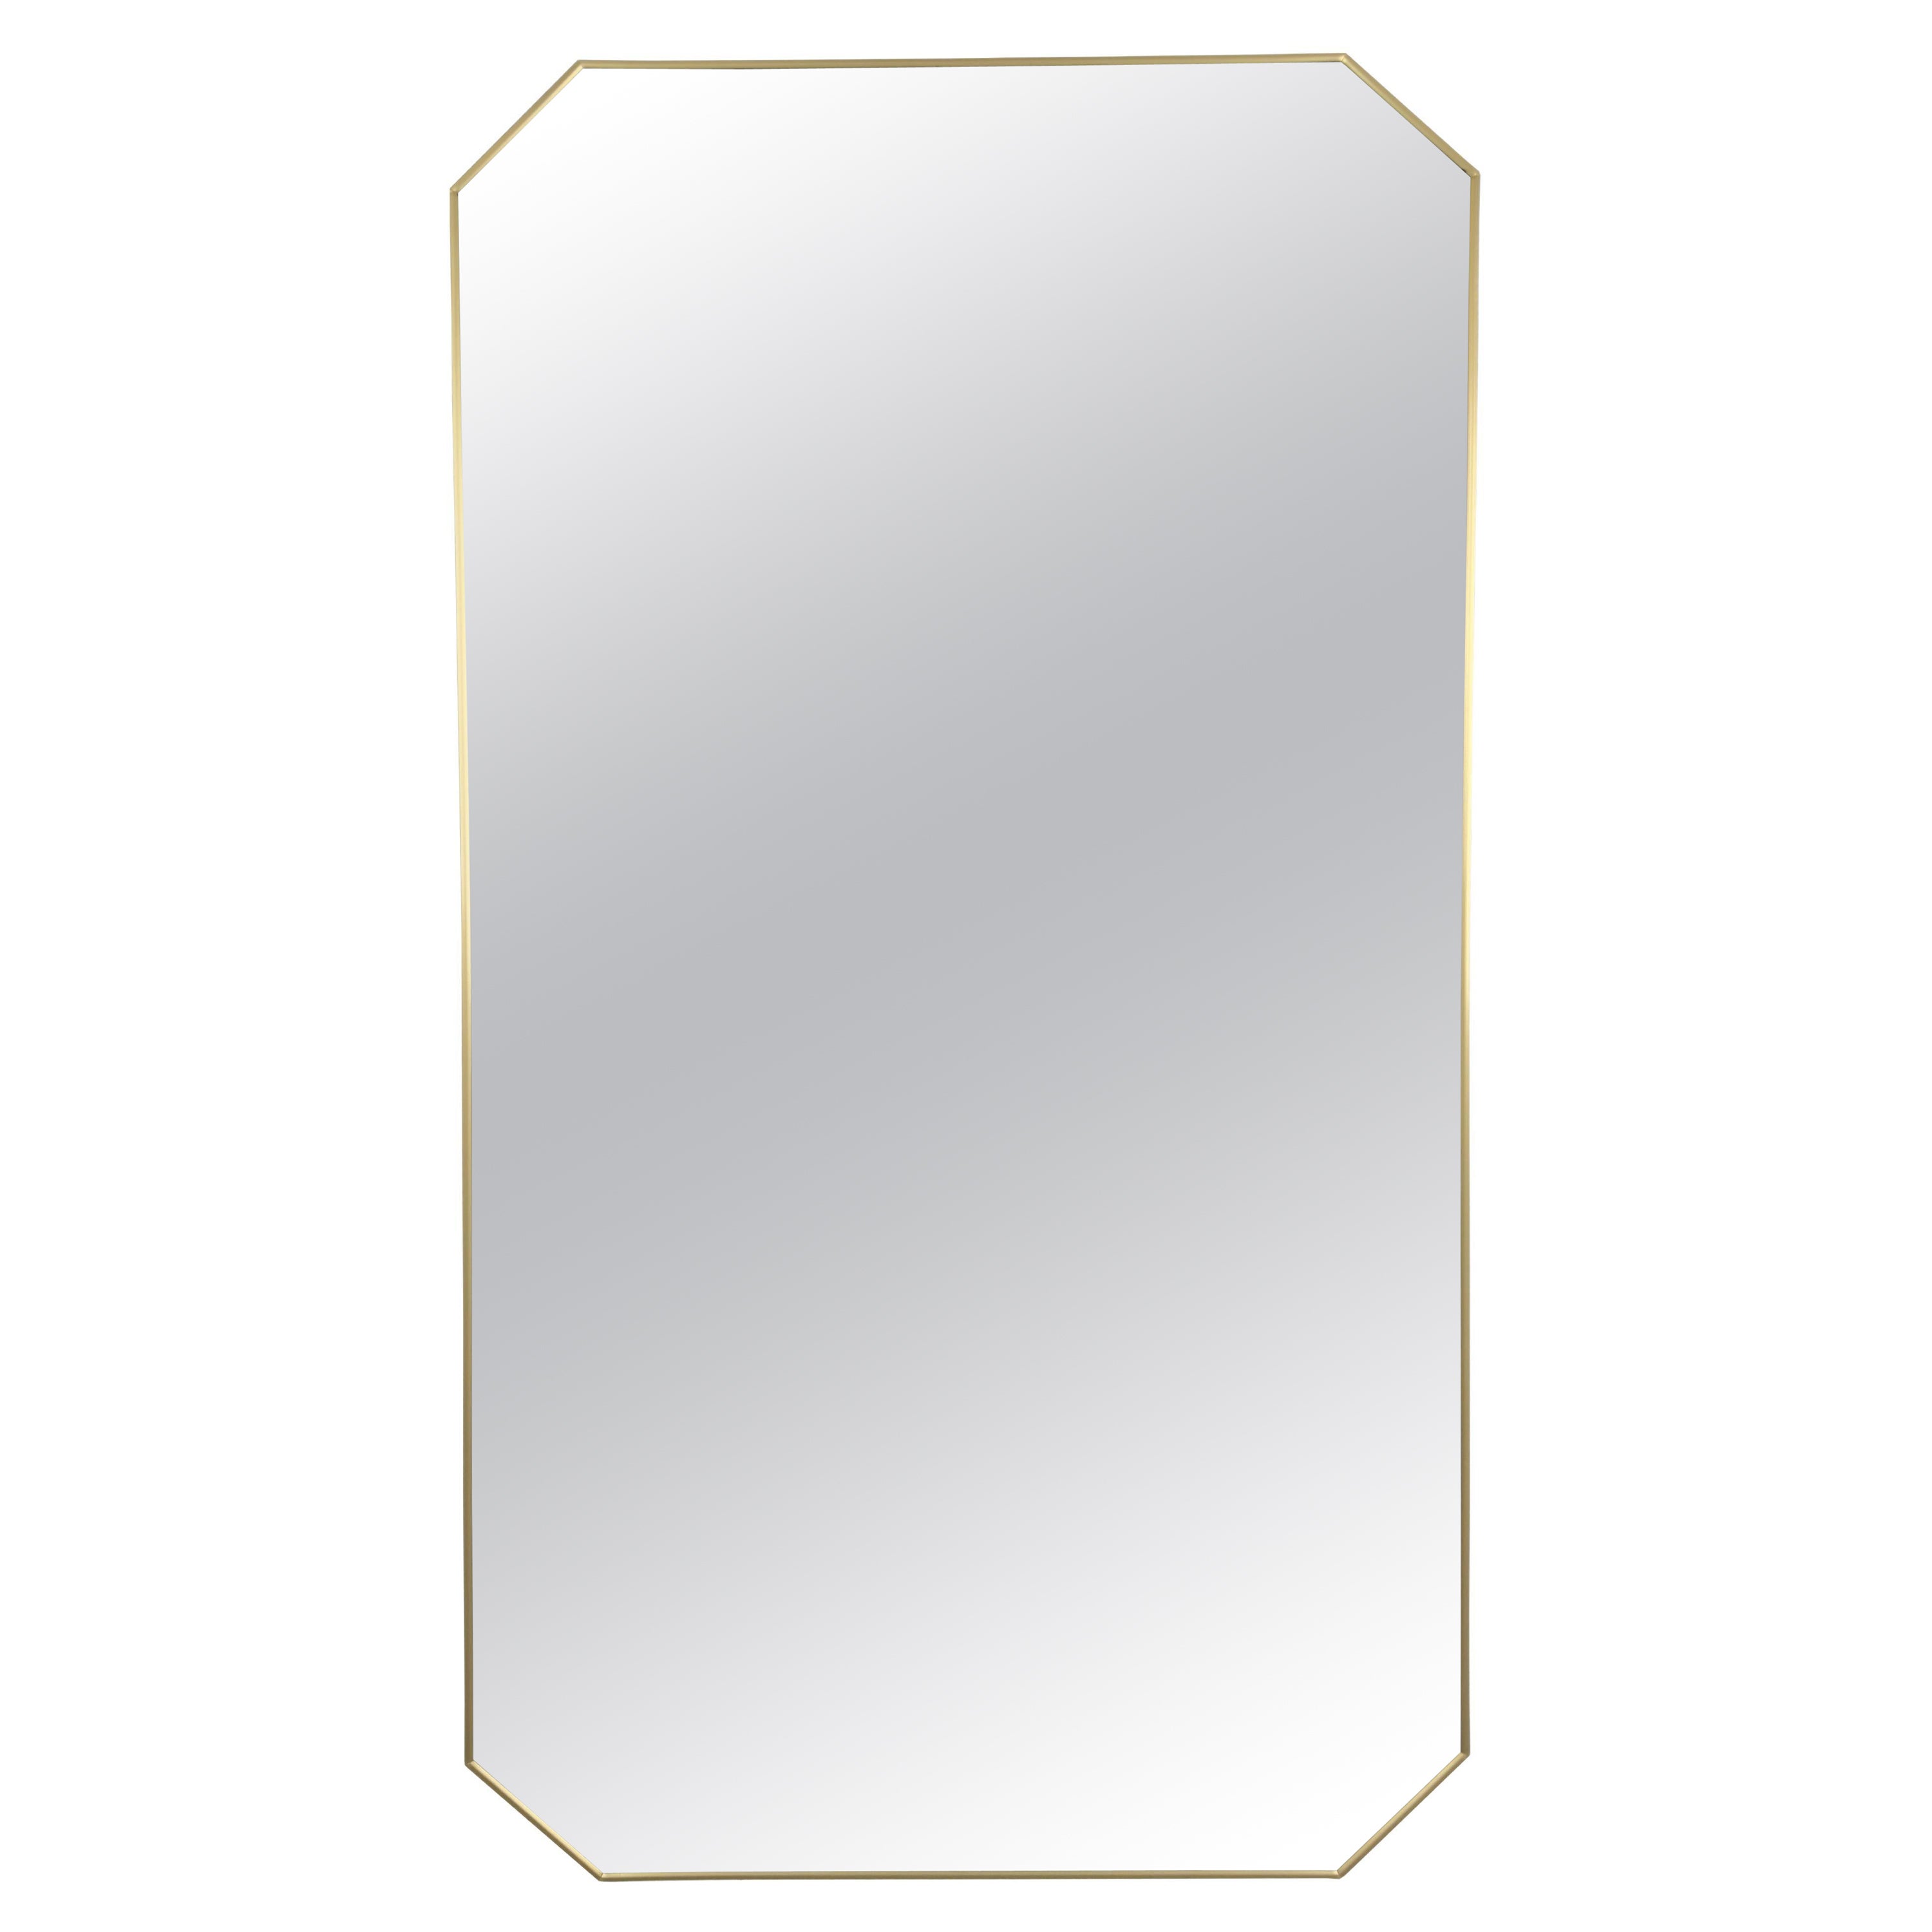 Friedman Brothers Mid Century Modern Style Beveled & Brass Frame Mirror  For Sale